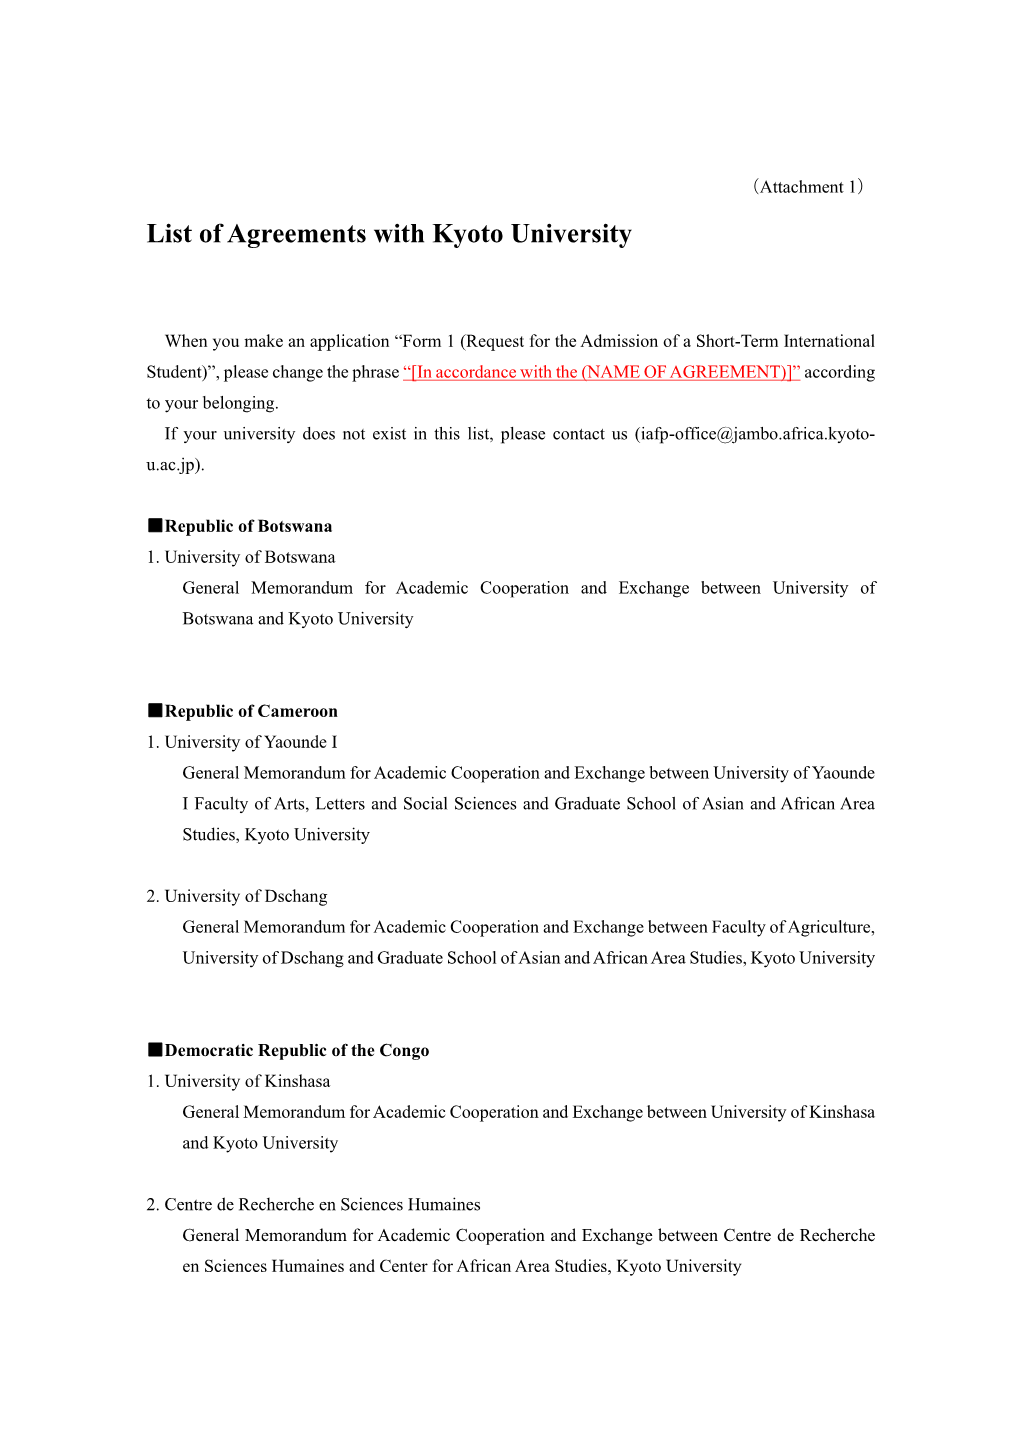 List of Agreements with Kyoto University